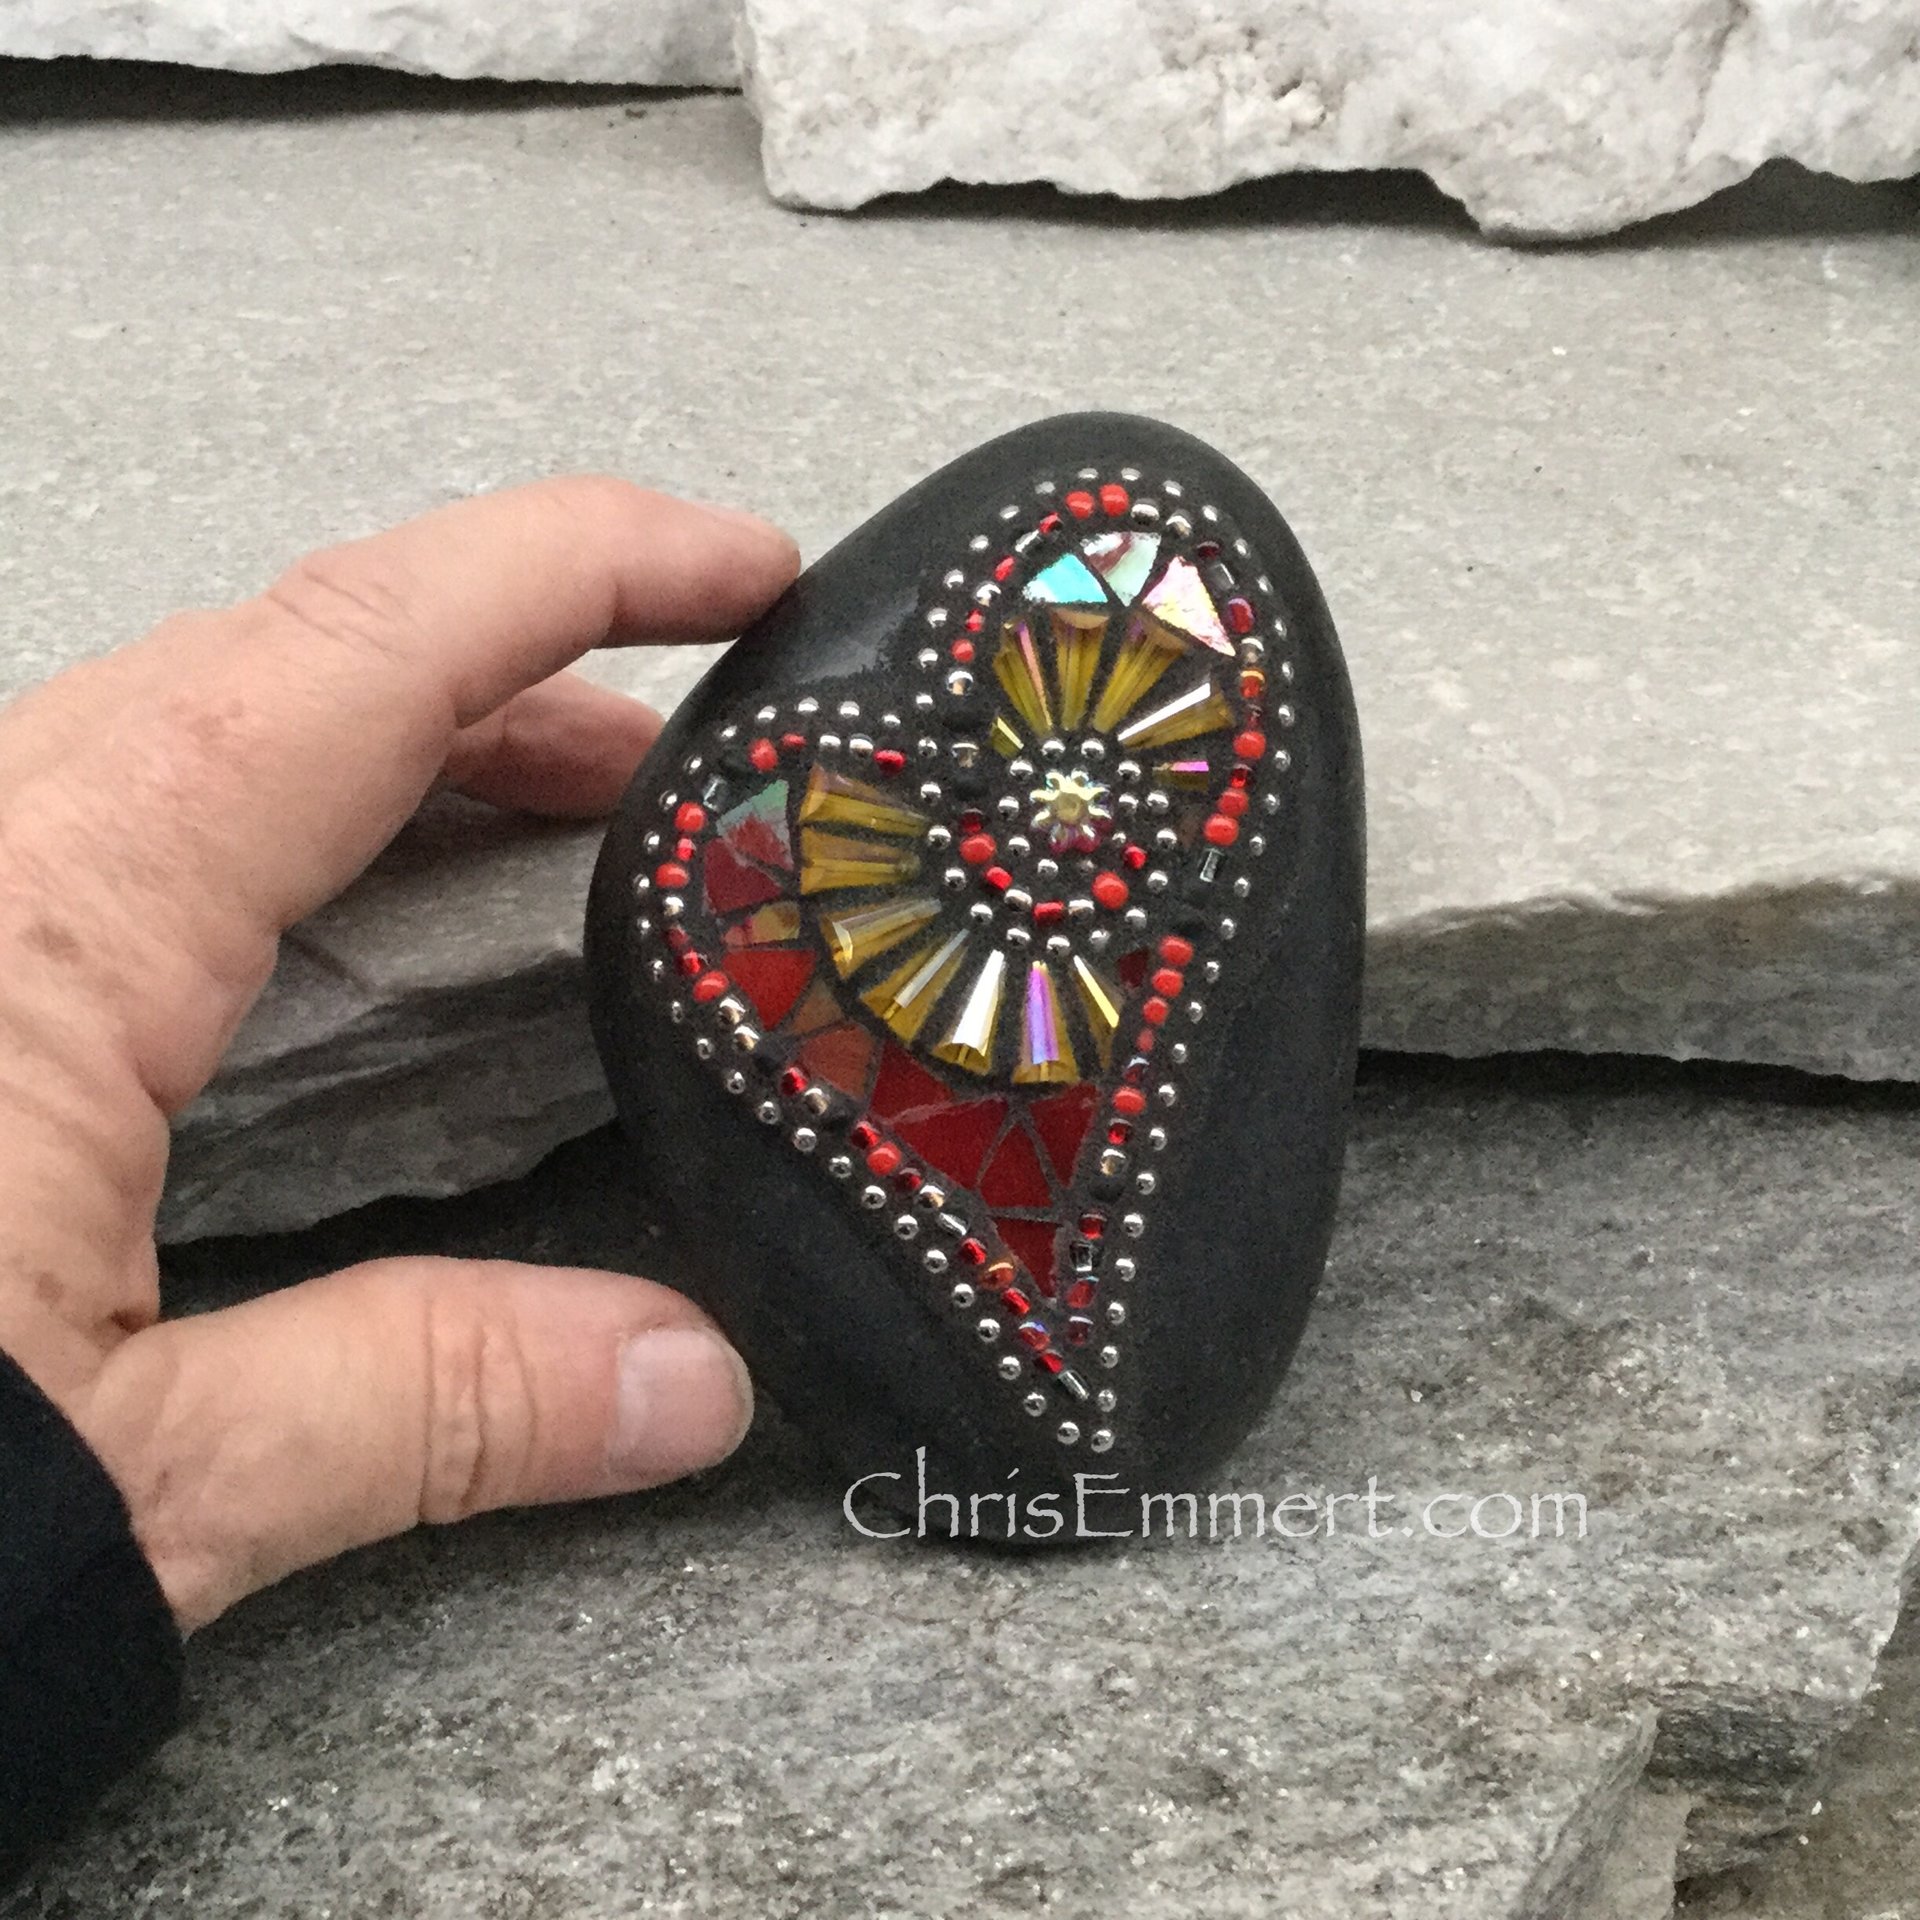 Red and Yellow Mosaic Heart, Mosaic Rock, Mosaic Garden Stone, Paperweight